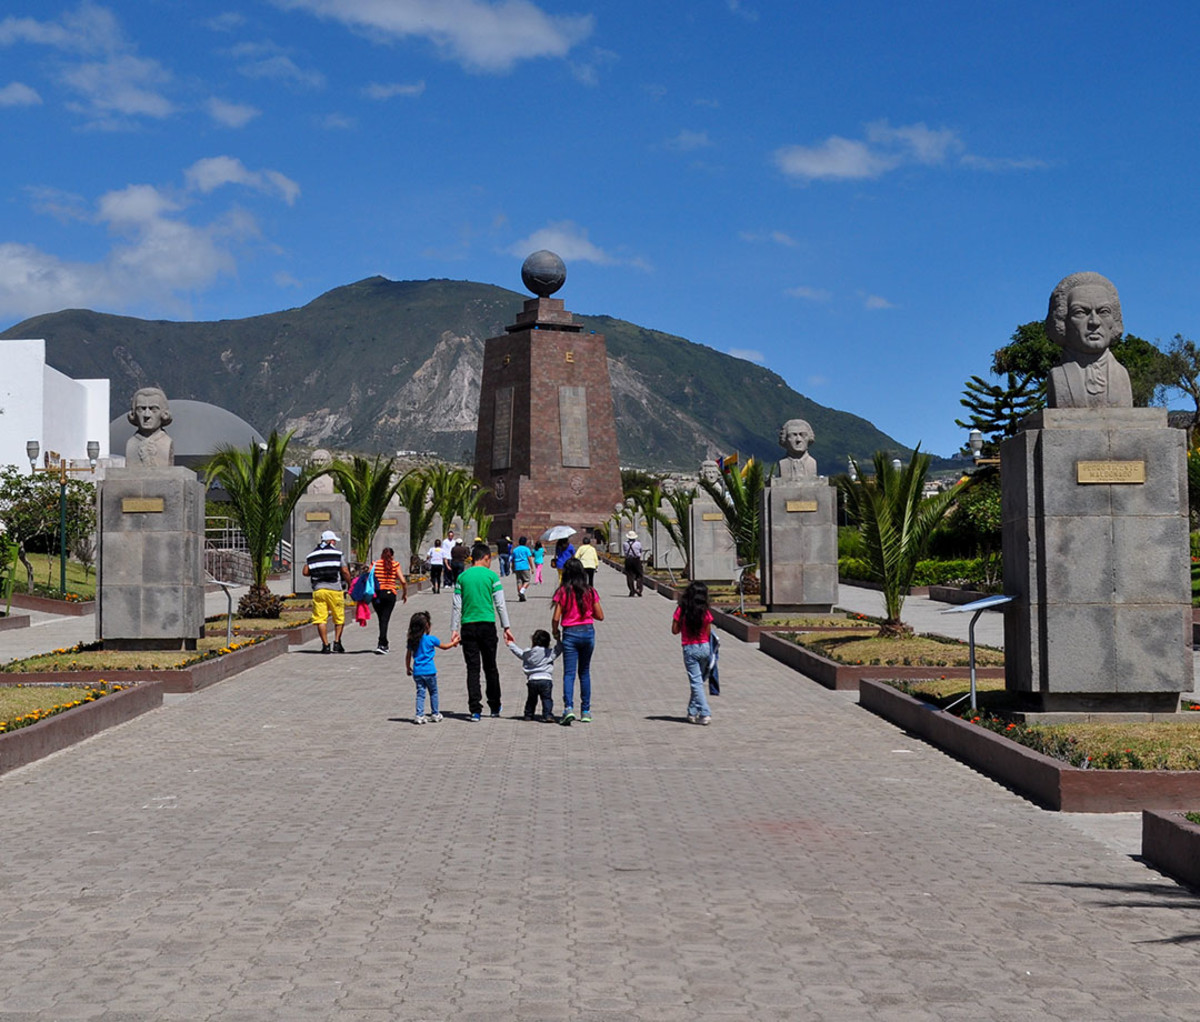 People visit the Middle of the World Monument in Quito, Ecuador